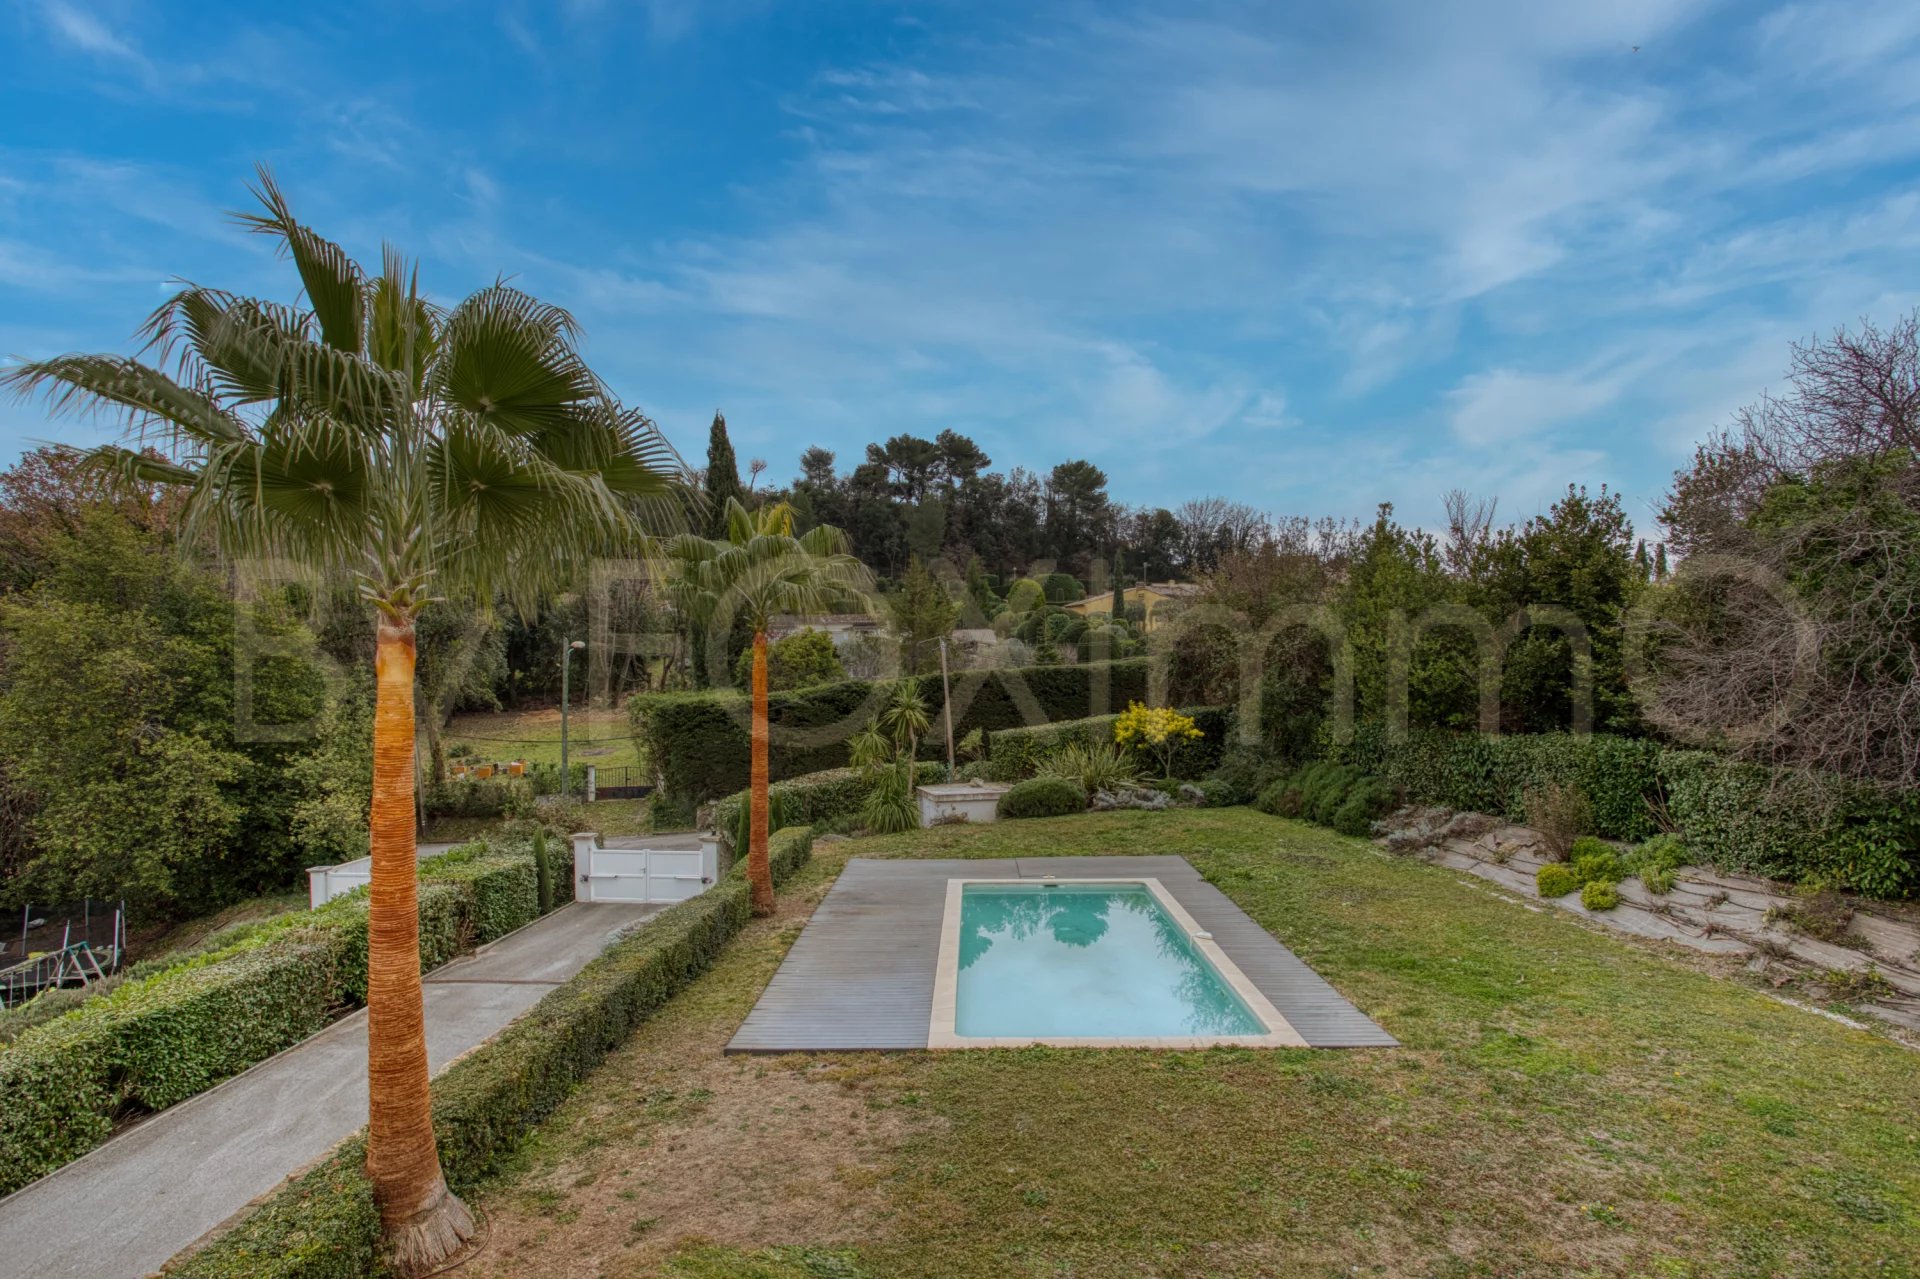 For sale in Côte d'Azur St PAUL /Cagnes, Magnificent new contemporary, Absolute calm, Dominant, Well exposed, Garage pool Flat land